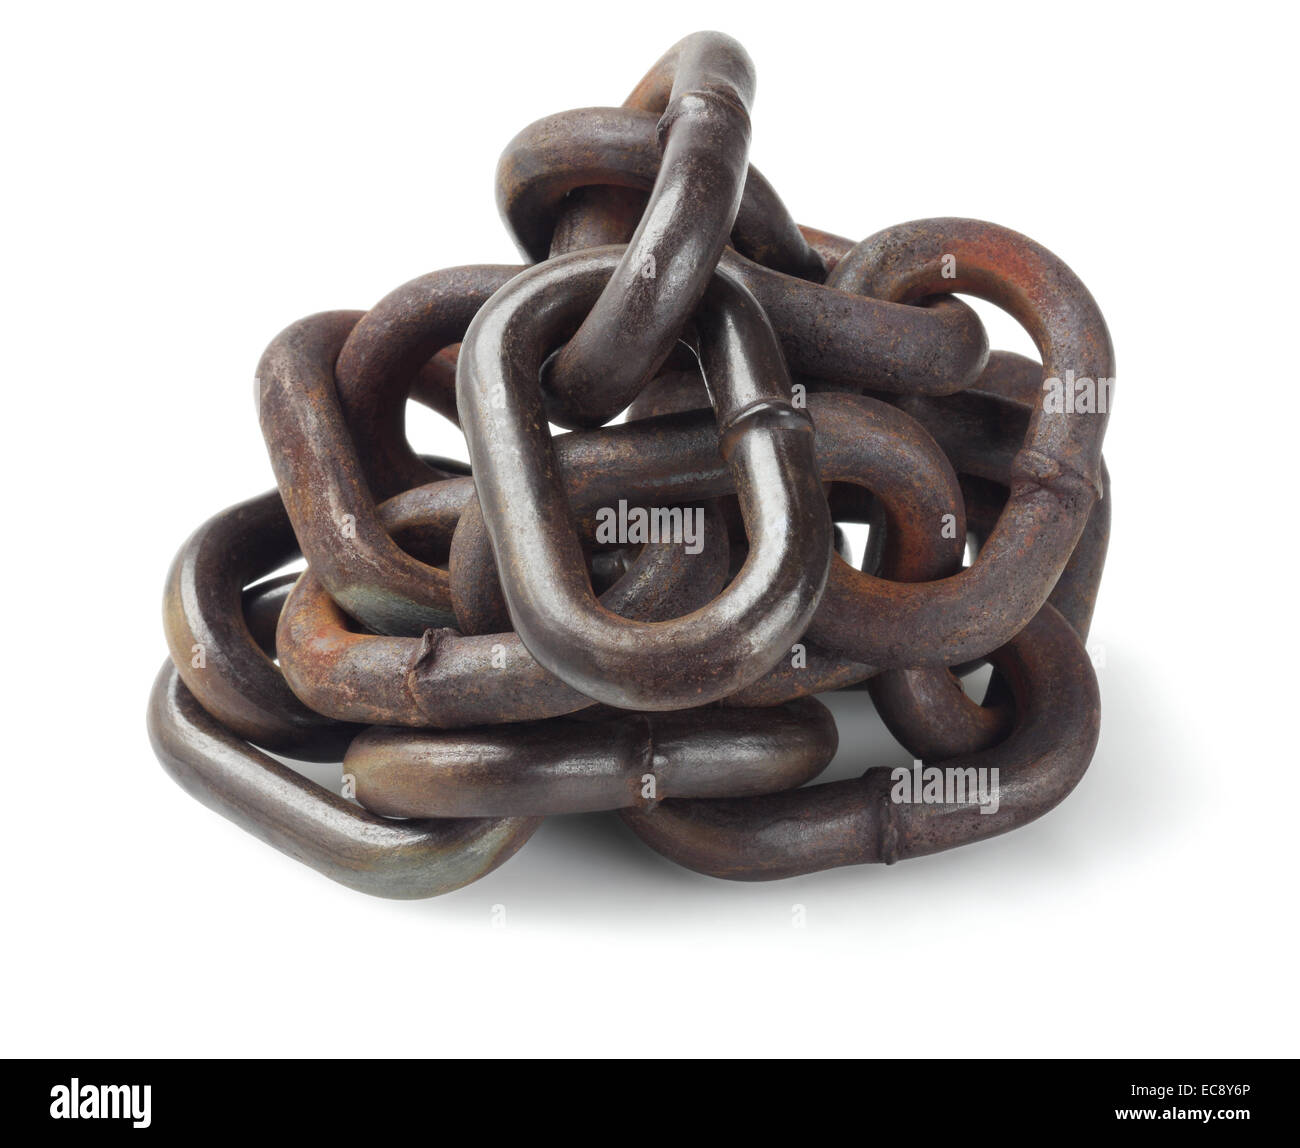 Pile Of Rusty Metal Chain On White Background Stock Photo